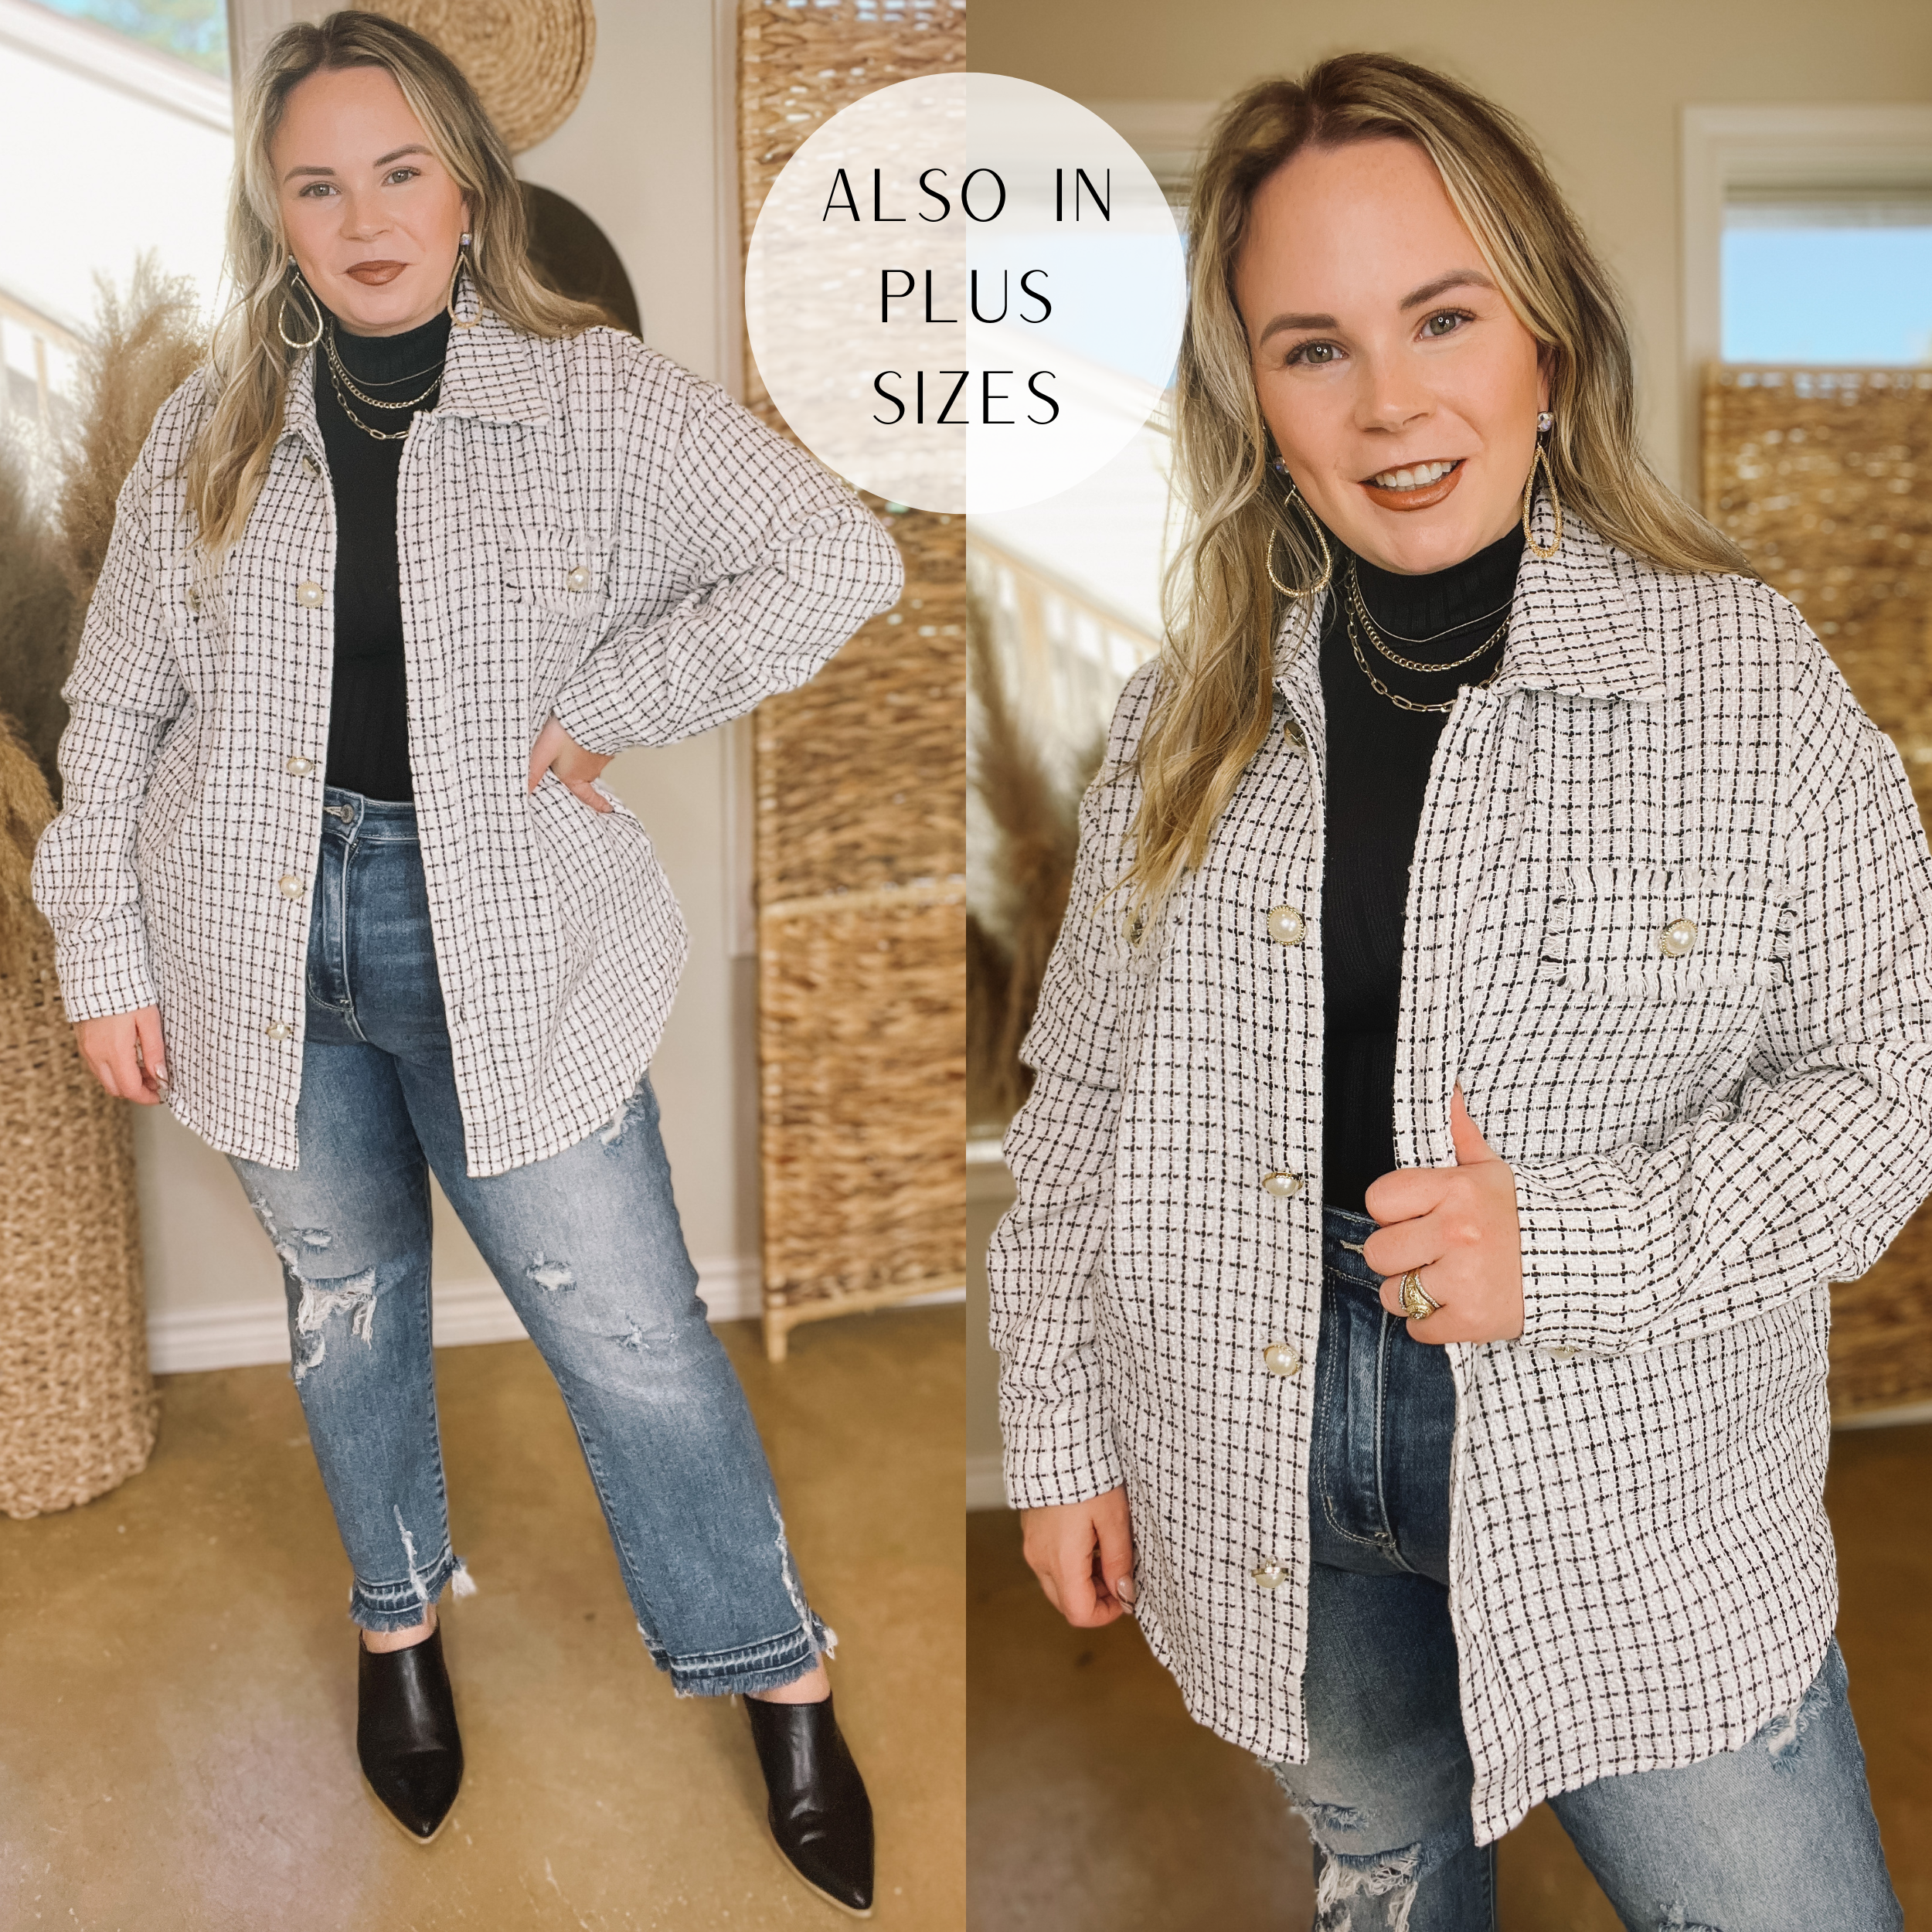 Model is wearing a white with black lines tweed jacket with pearl buttons along the front and on the pockets. Model has this jacket paired with a black undershirt, straight leg jeans, b lack mules, and gold jewelry. Background is hues of white and brown. 